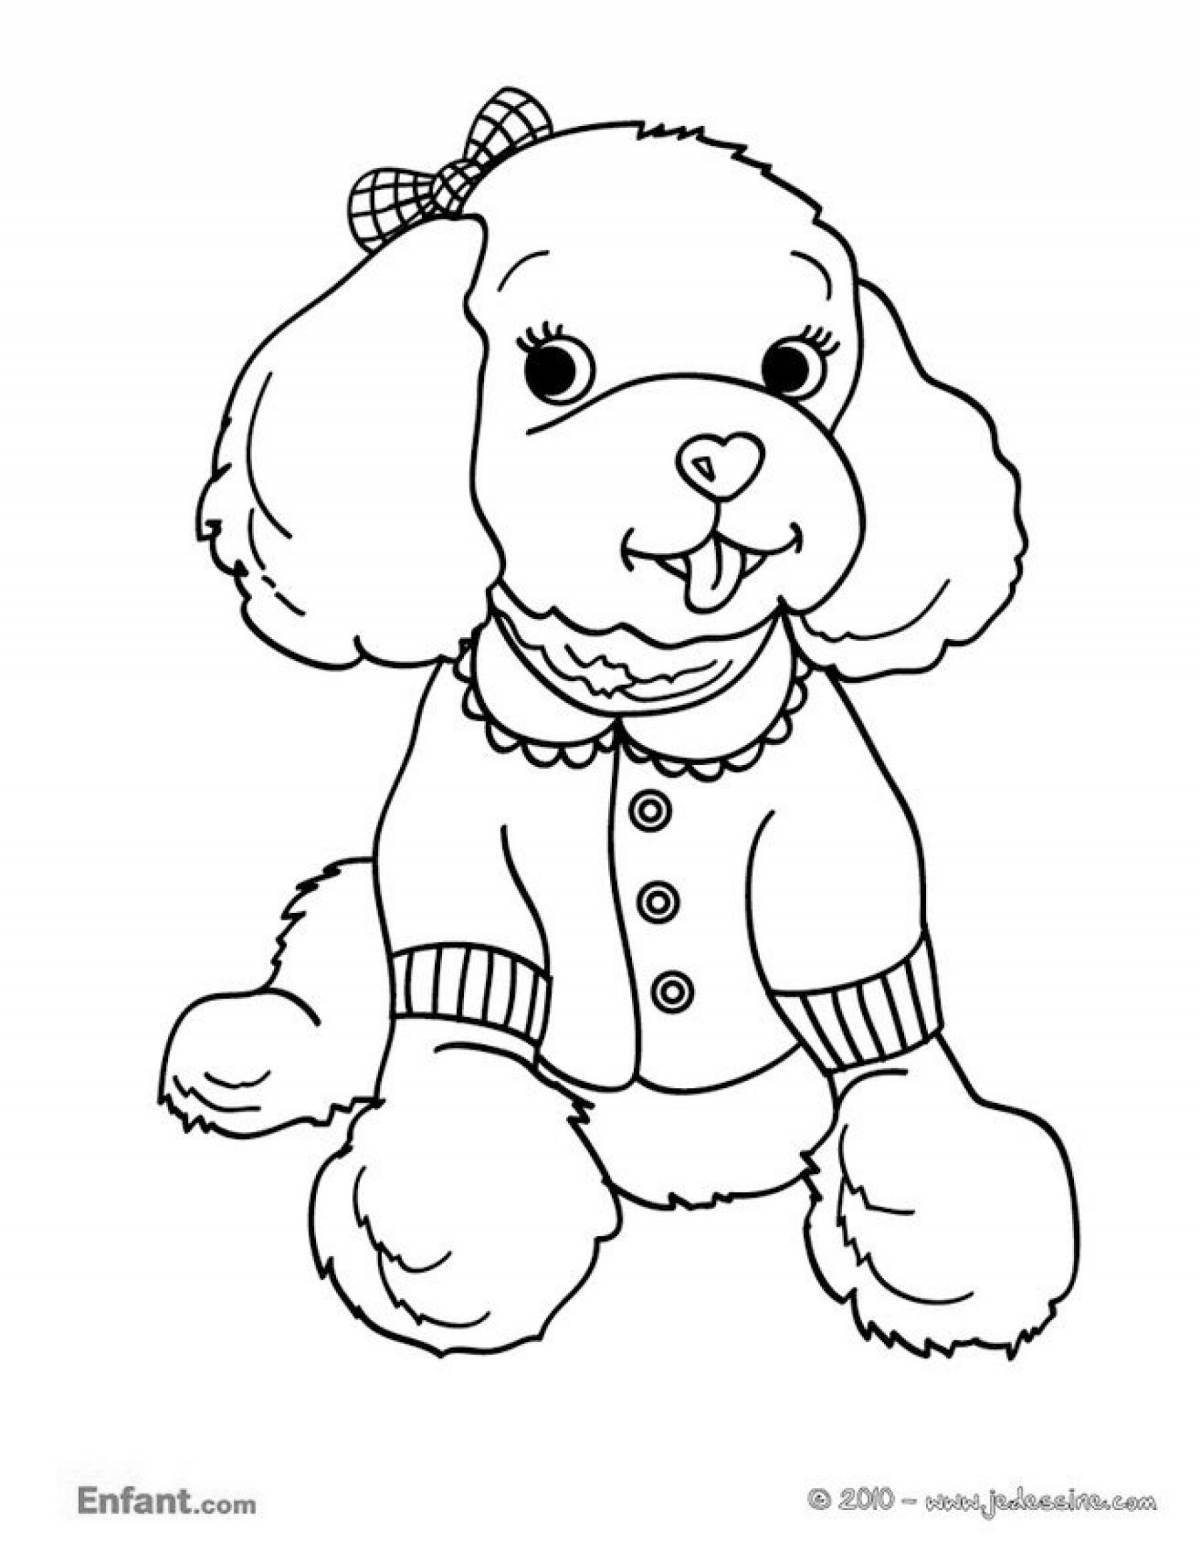 Live coloring dog with clothes